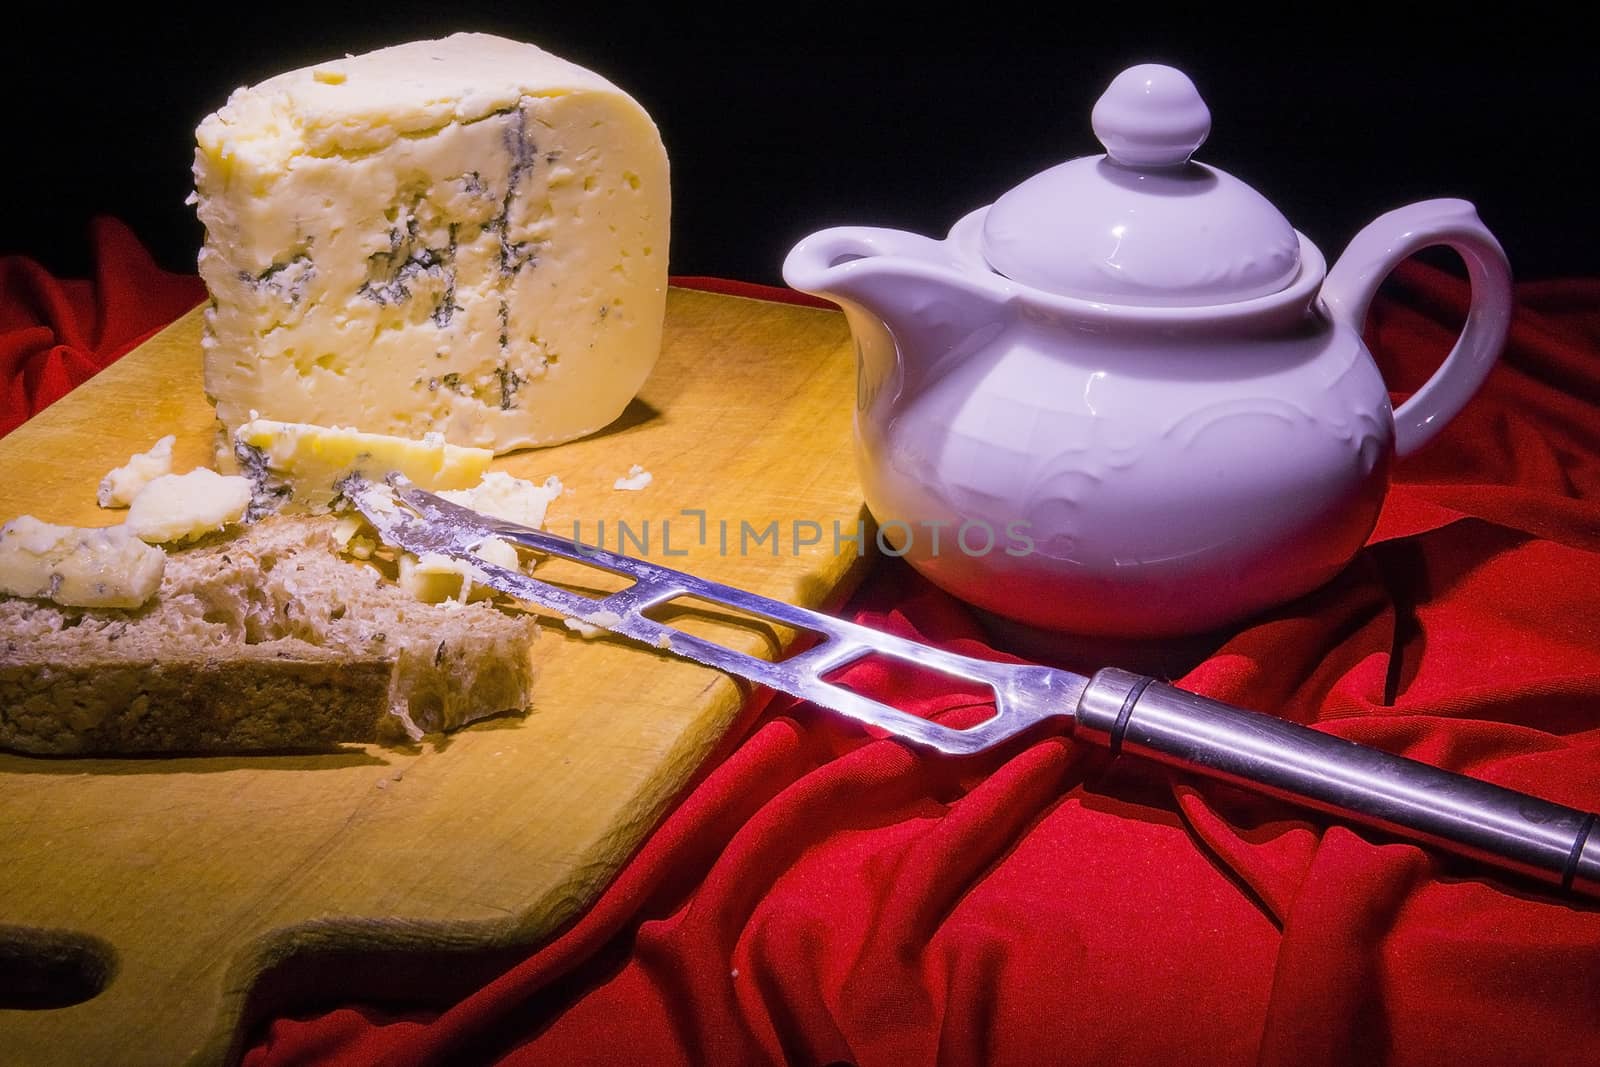 Triangular slice of Roquefort cheese is on the board next to the knife for cheese and white teapot